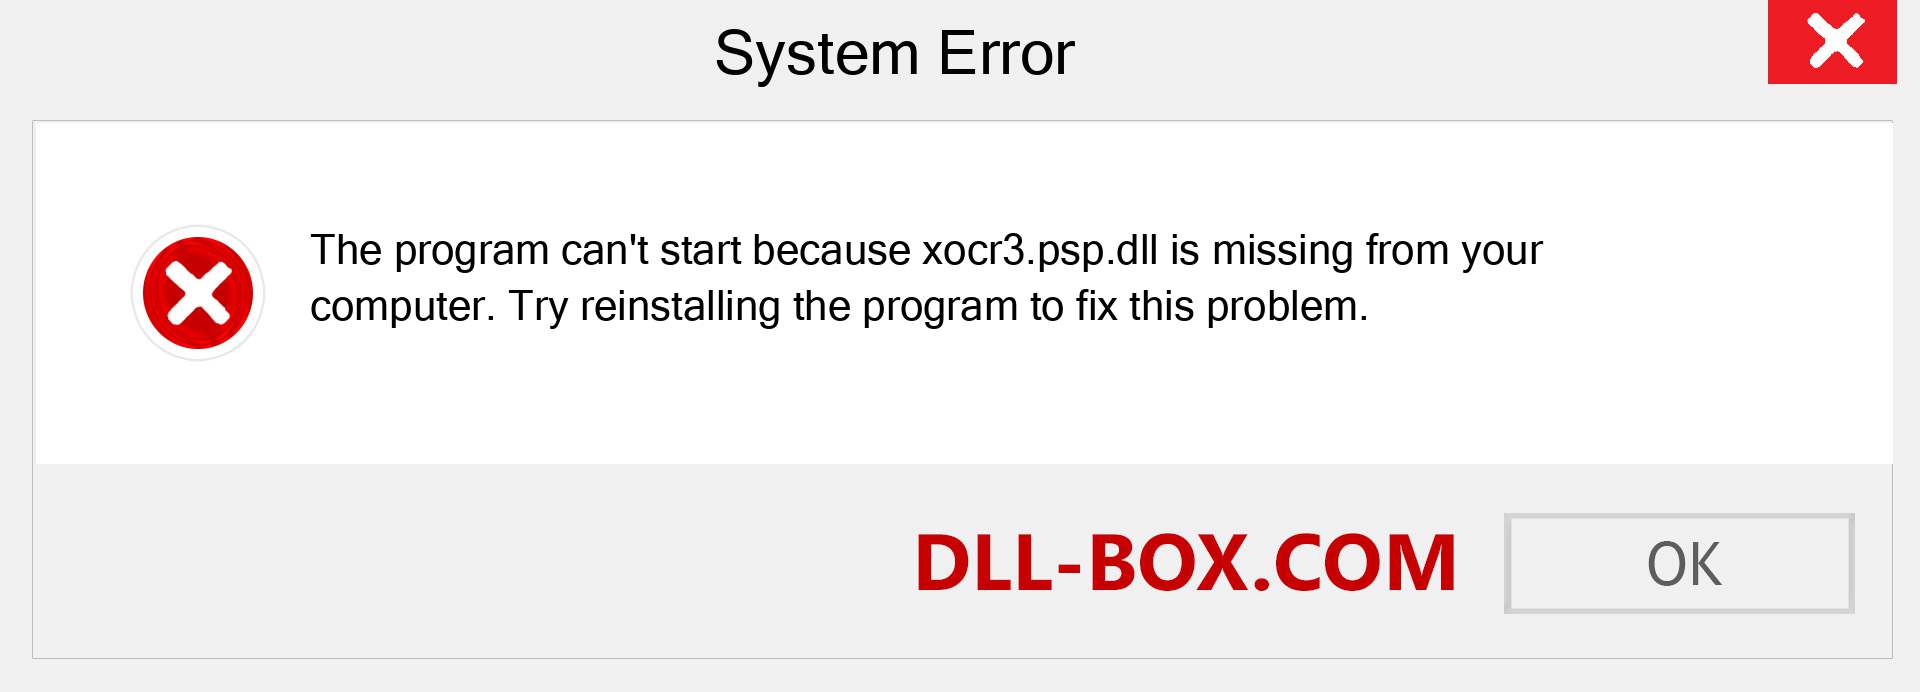  xocr3.psp.dll file is missing?. Download for Windows 7, 8, 10 - Fix  xocr3.psp dll Missing Error on Windows, photos, images